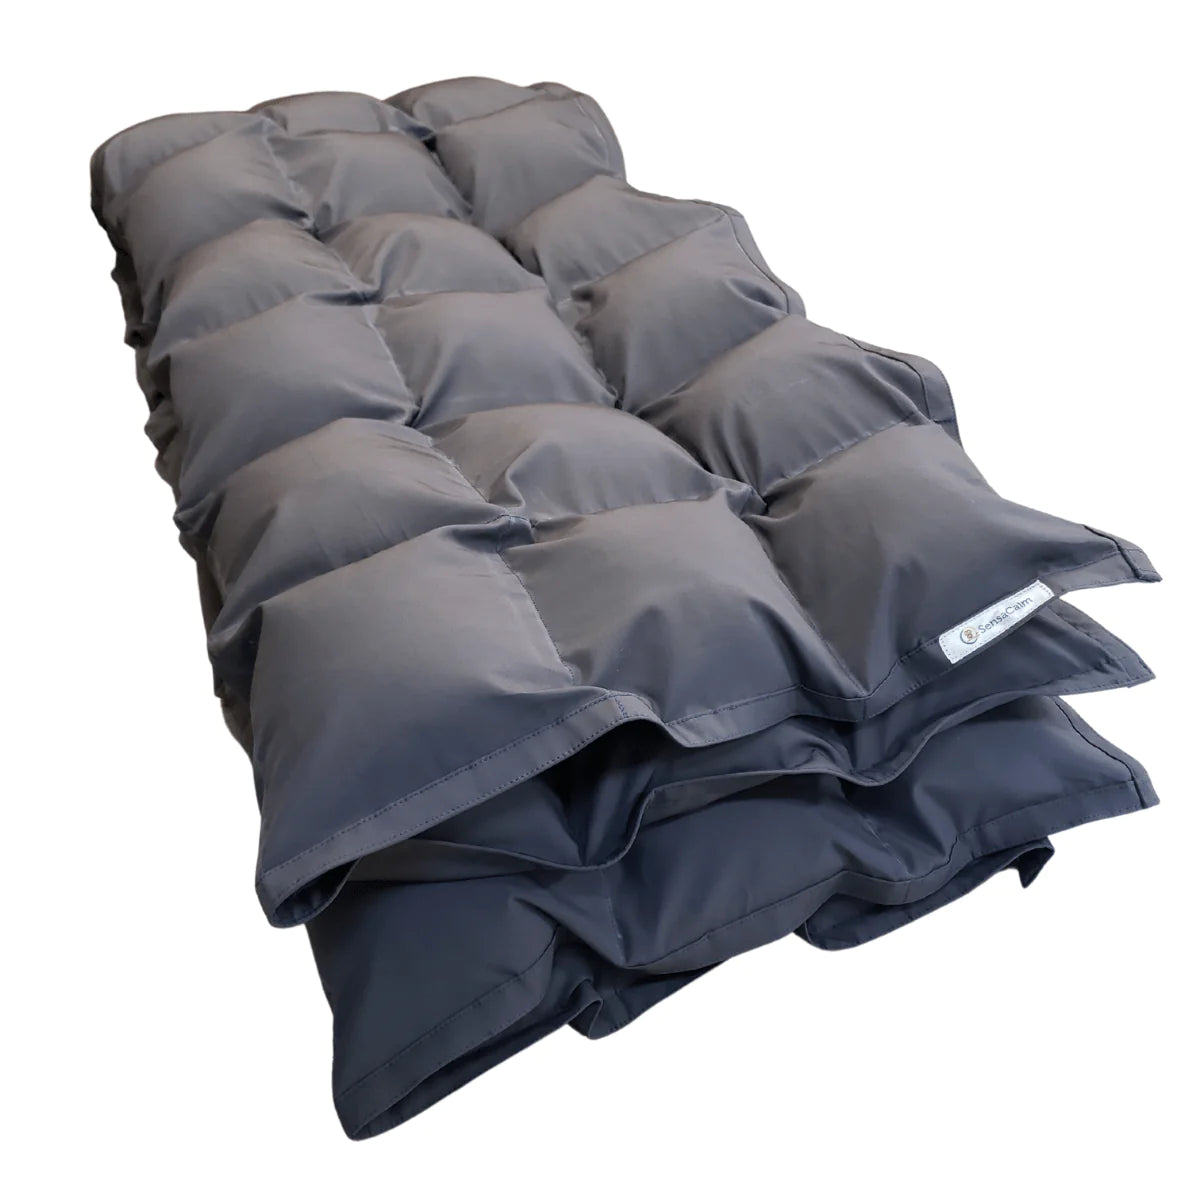 Clearance Weighted Blanket - Medium 11 lb Gray (for 90 lb user)